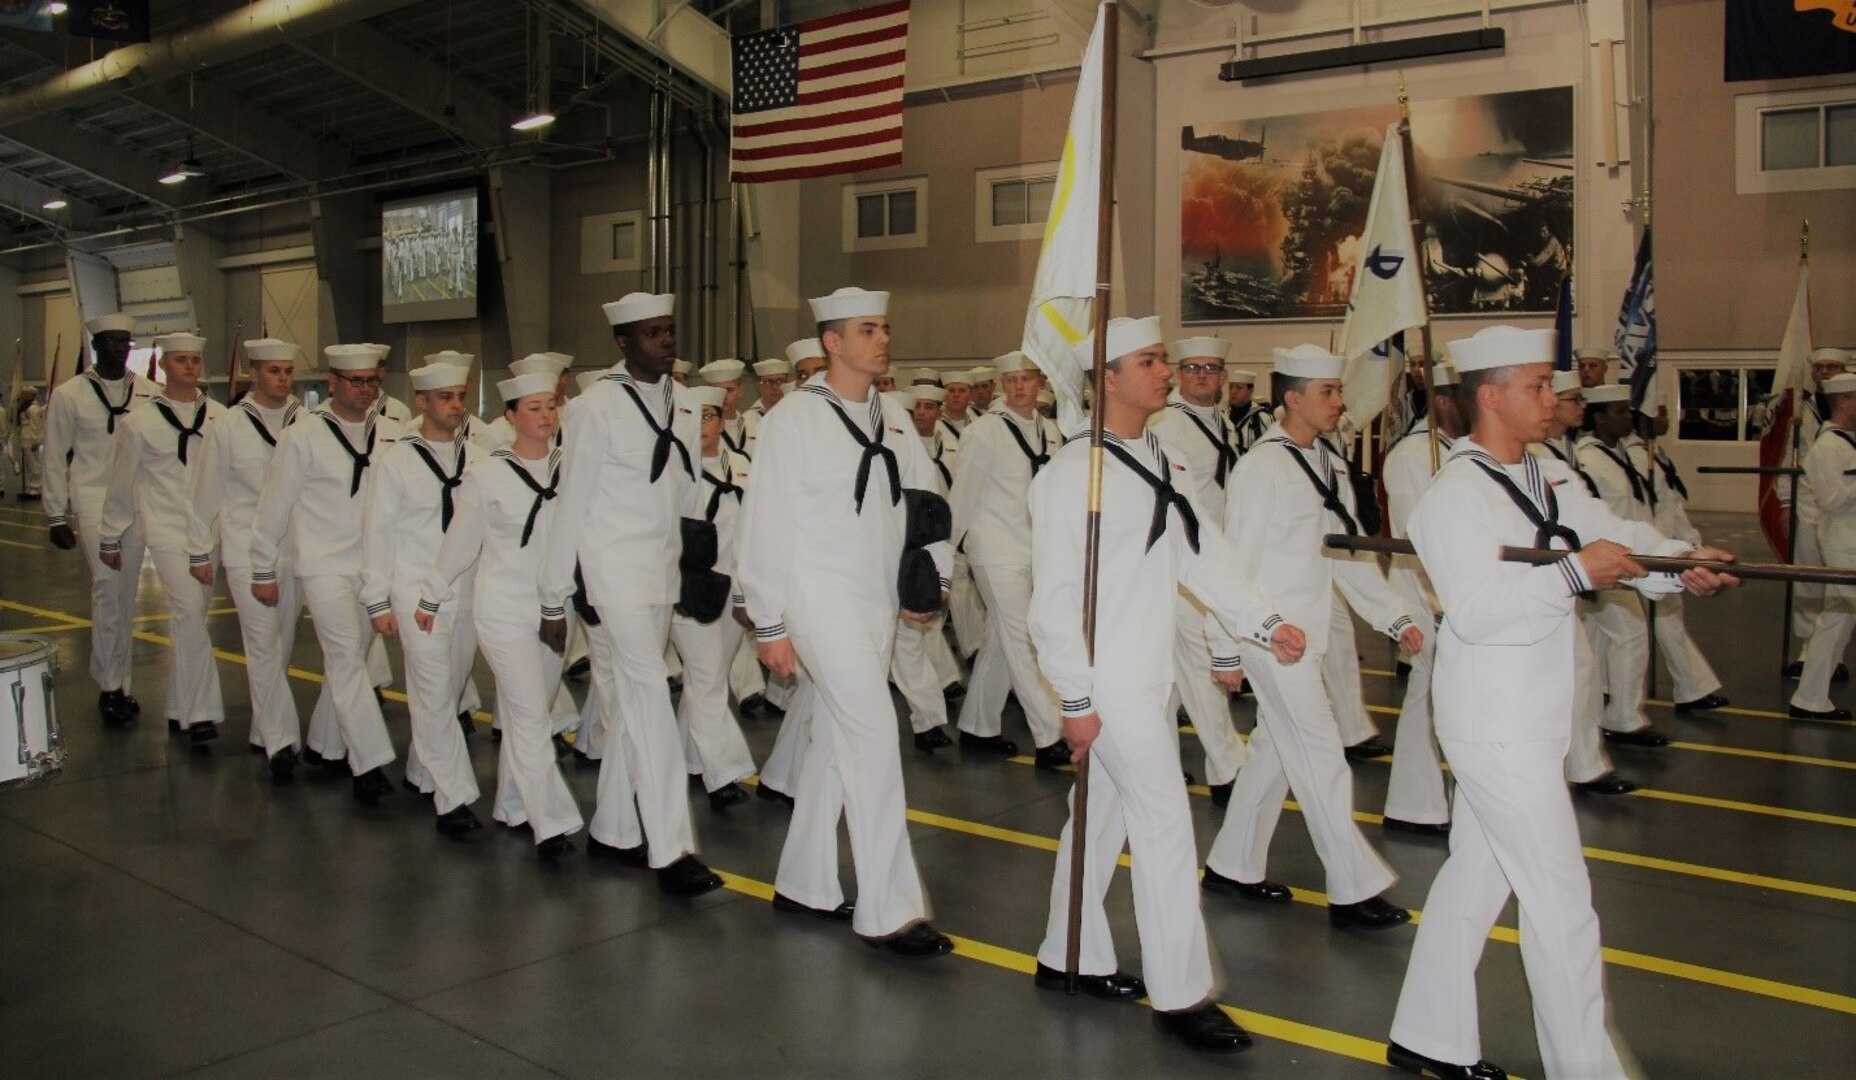 IMAGE: GREAT LAKES, Ill. (May 18, 2018) - Recruit Division 213 marches with the Naval Surface Warfare Center Dahlgren Division Dam Neck Activity flag (blue, at right) at their graduation ceremony. NSWCDD Dam Neck Activity Commanding Officer Cmdr. Andrew J. Hoffman led a contingent at graduation after another contingent participated in the division's Battle Stations 21 drills and Capping Ceremony earlier in the week.